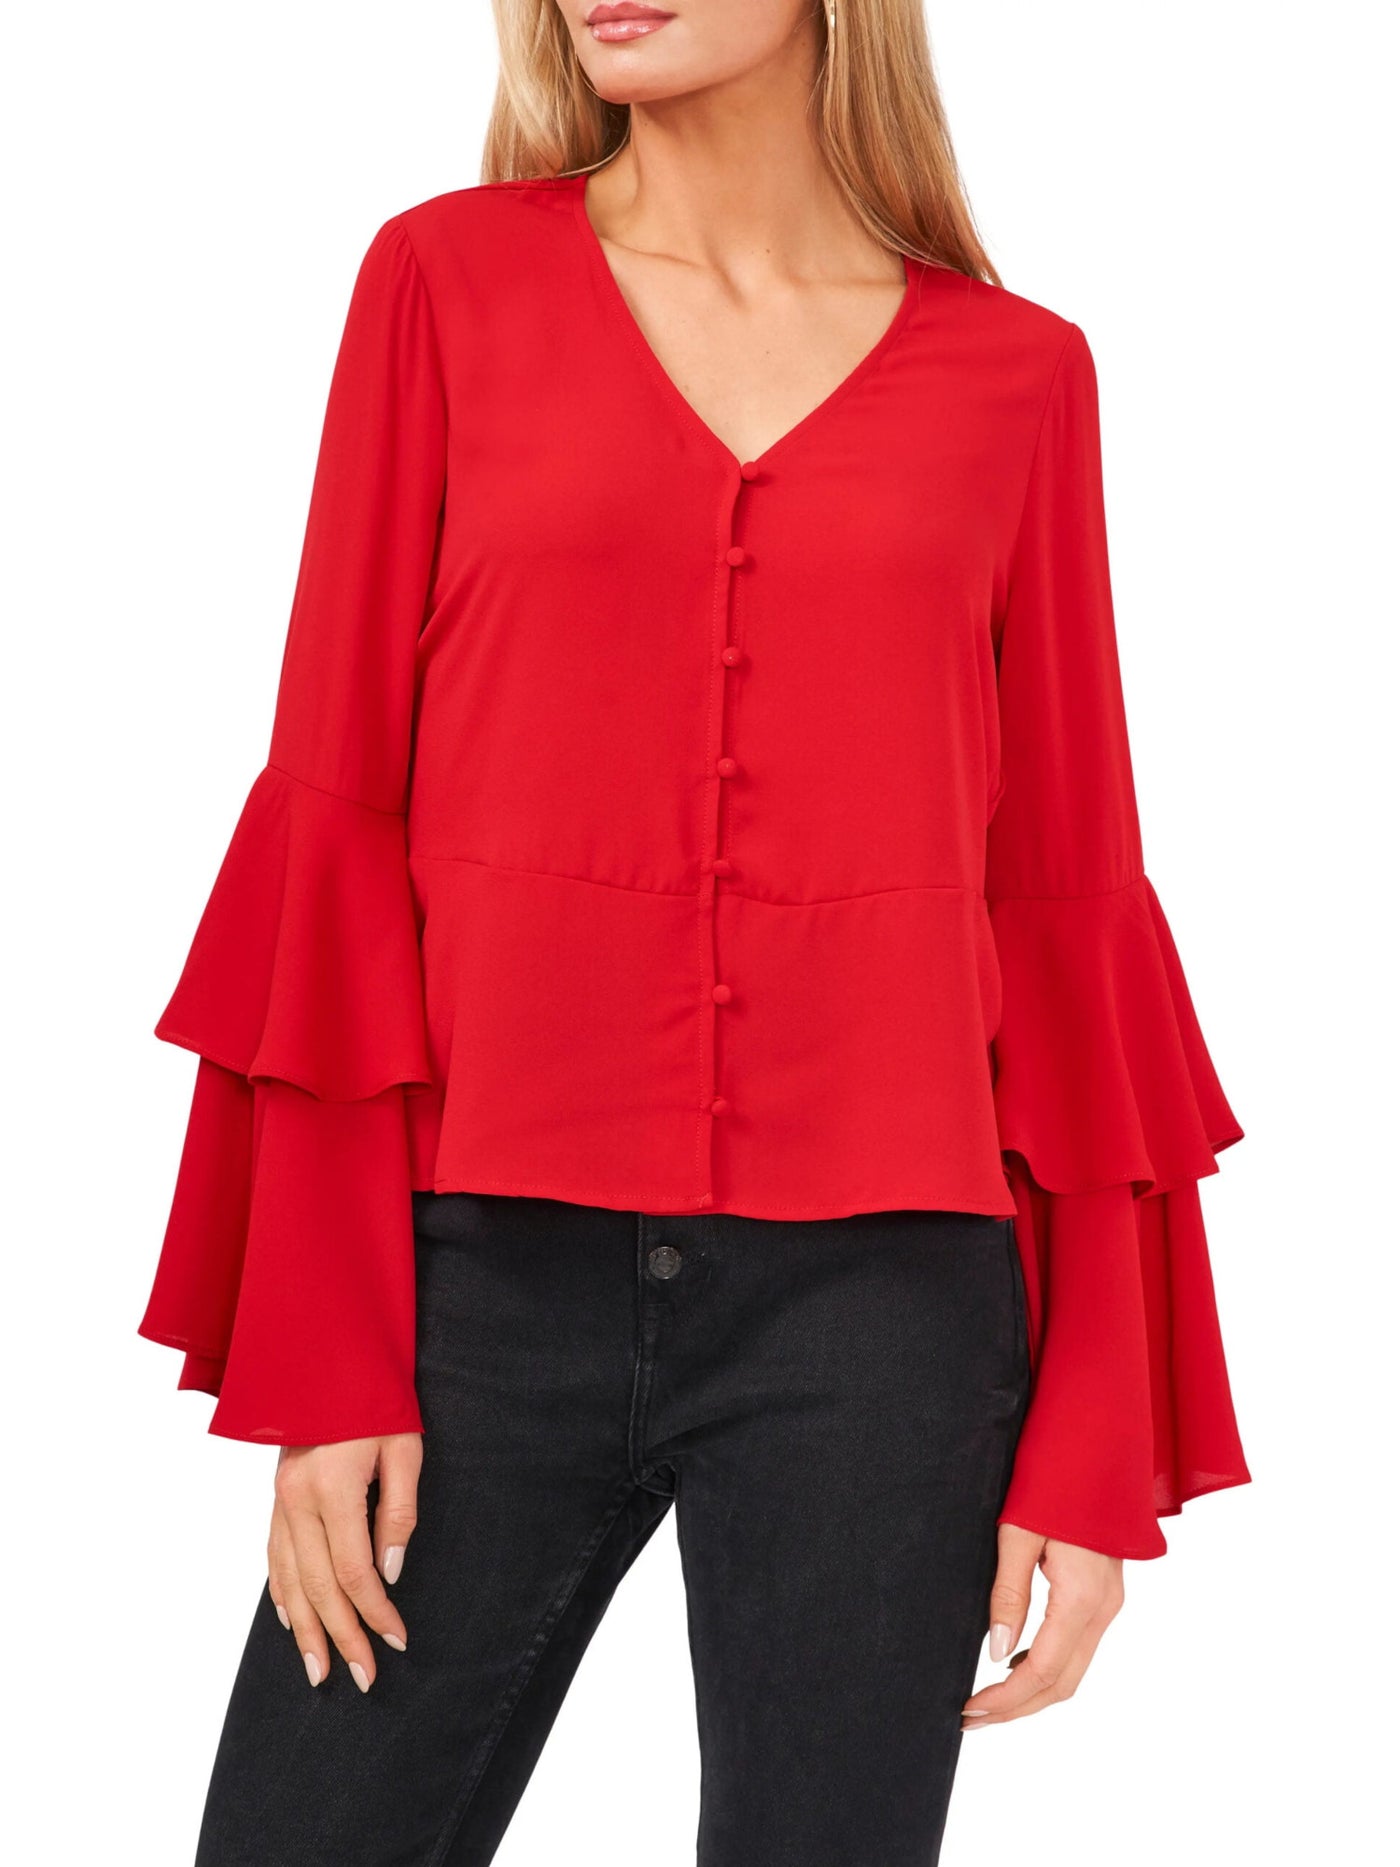 VINCE CAMUTO Womens Red Unlined Button Front Tiered Ruffled Cuff Bell Sleeve V Neck Wear To Work Peplum Top M